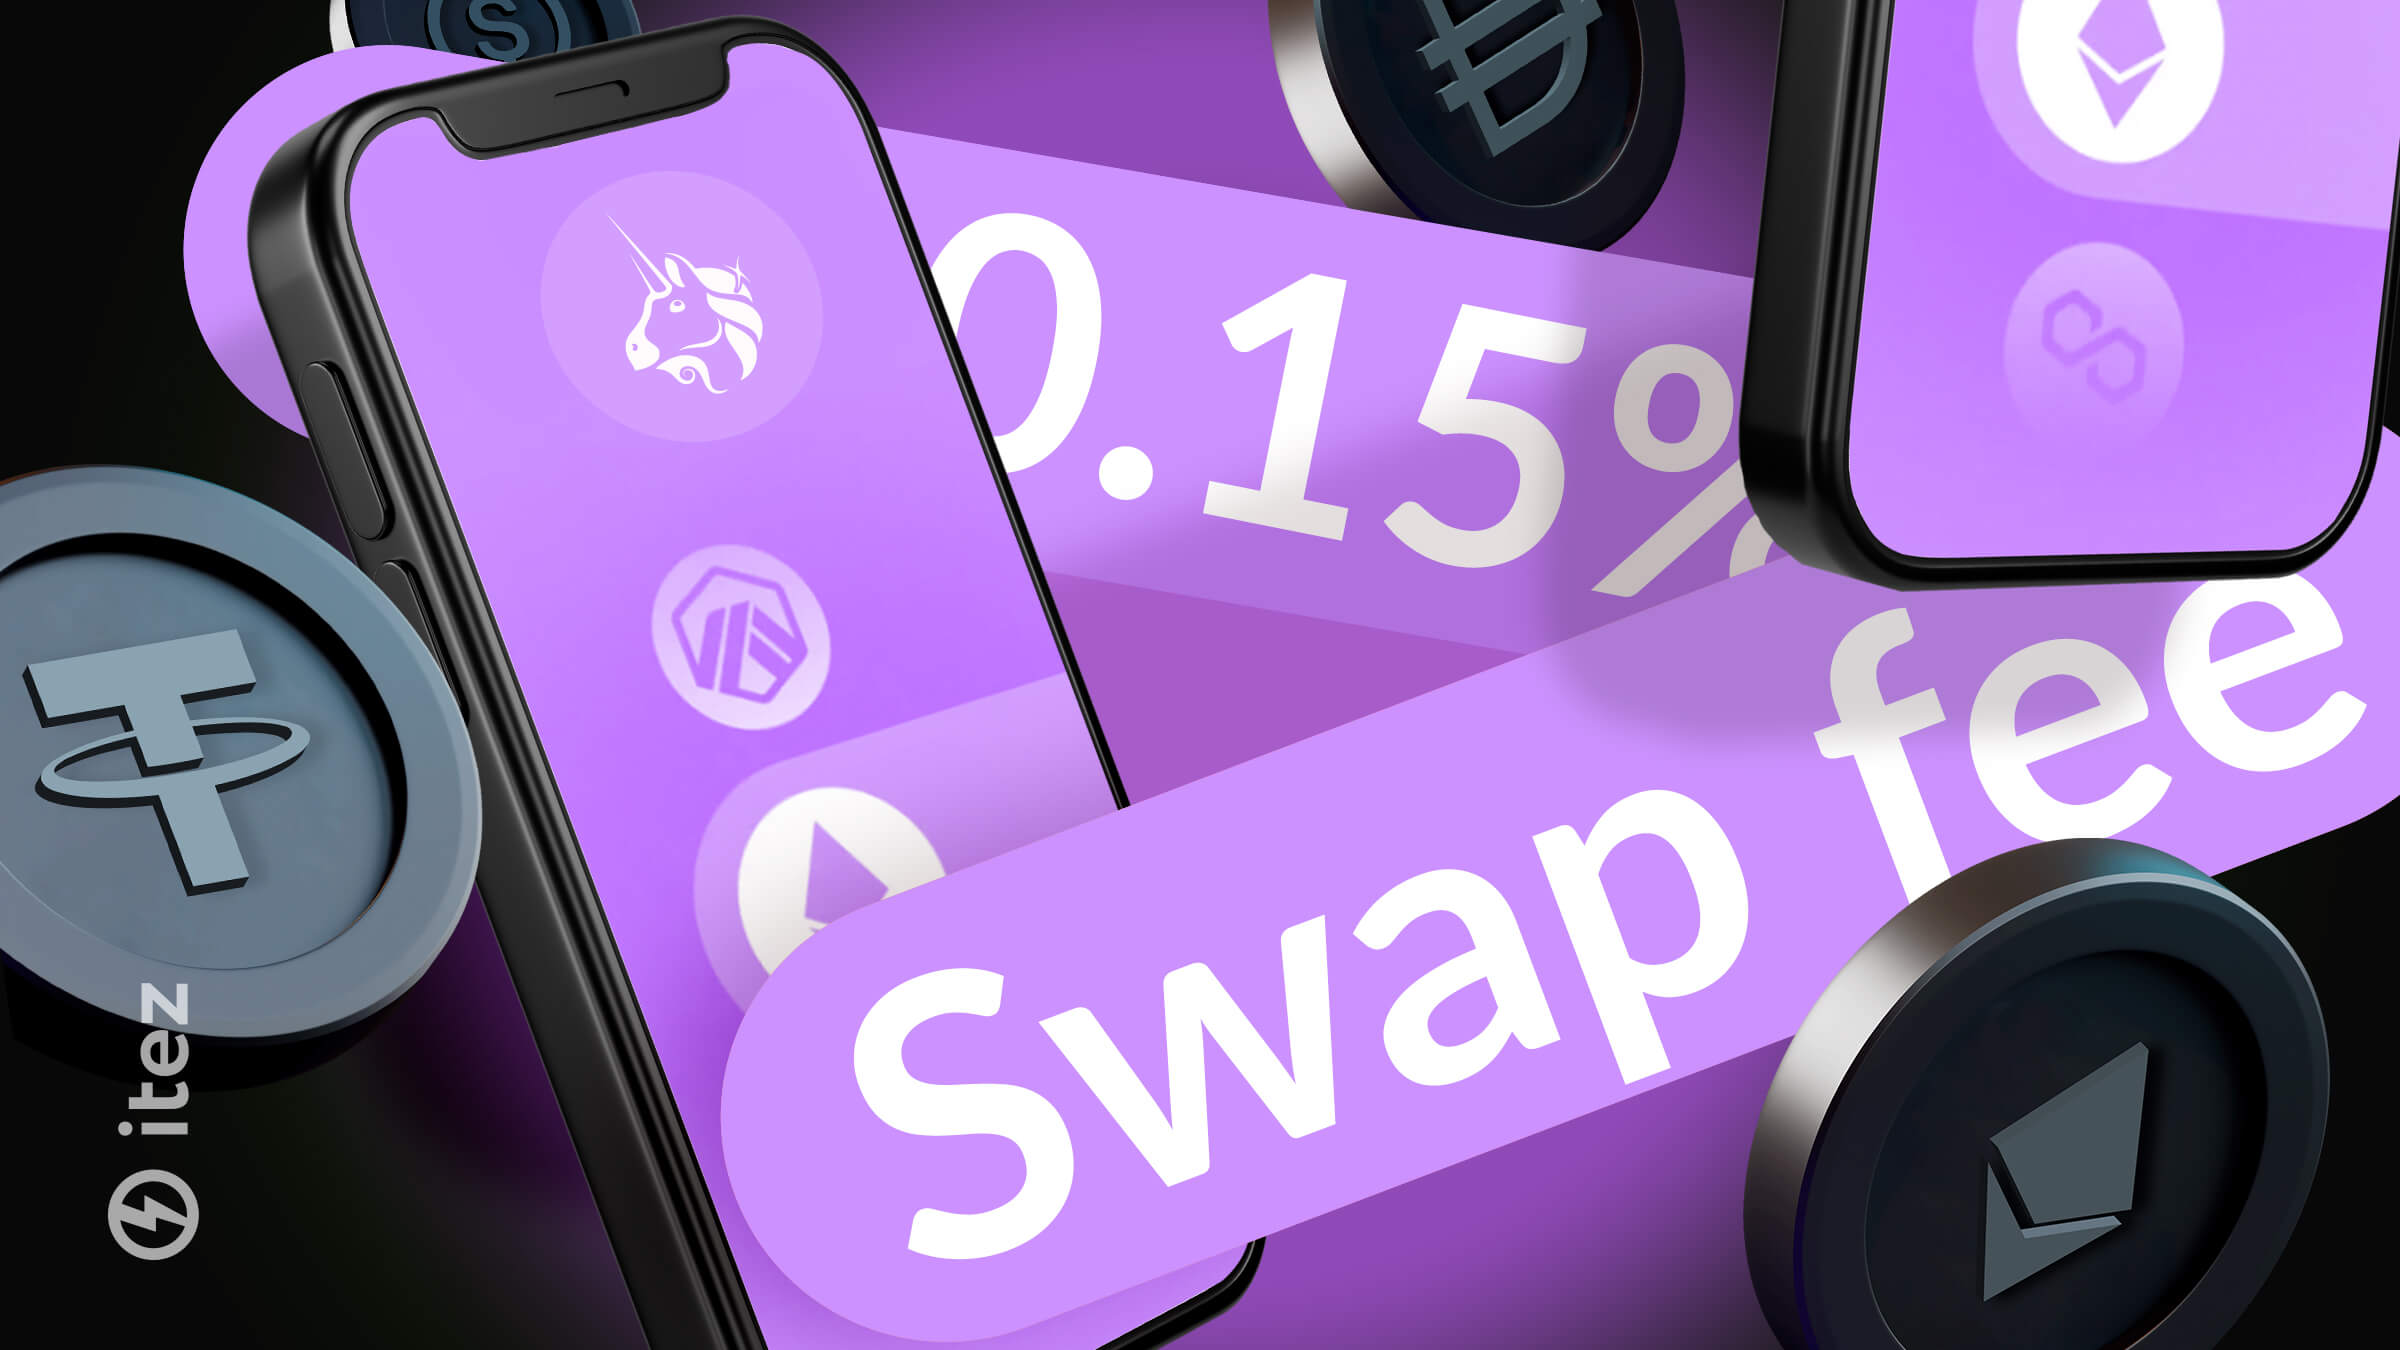 Uniswap introduces swap fee of 0.15% for certain tokens